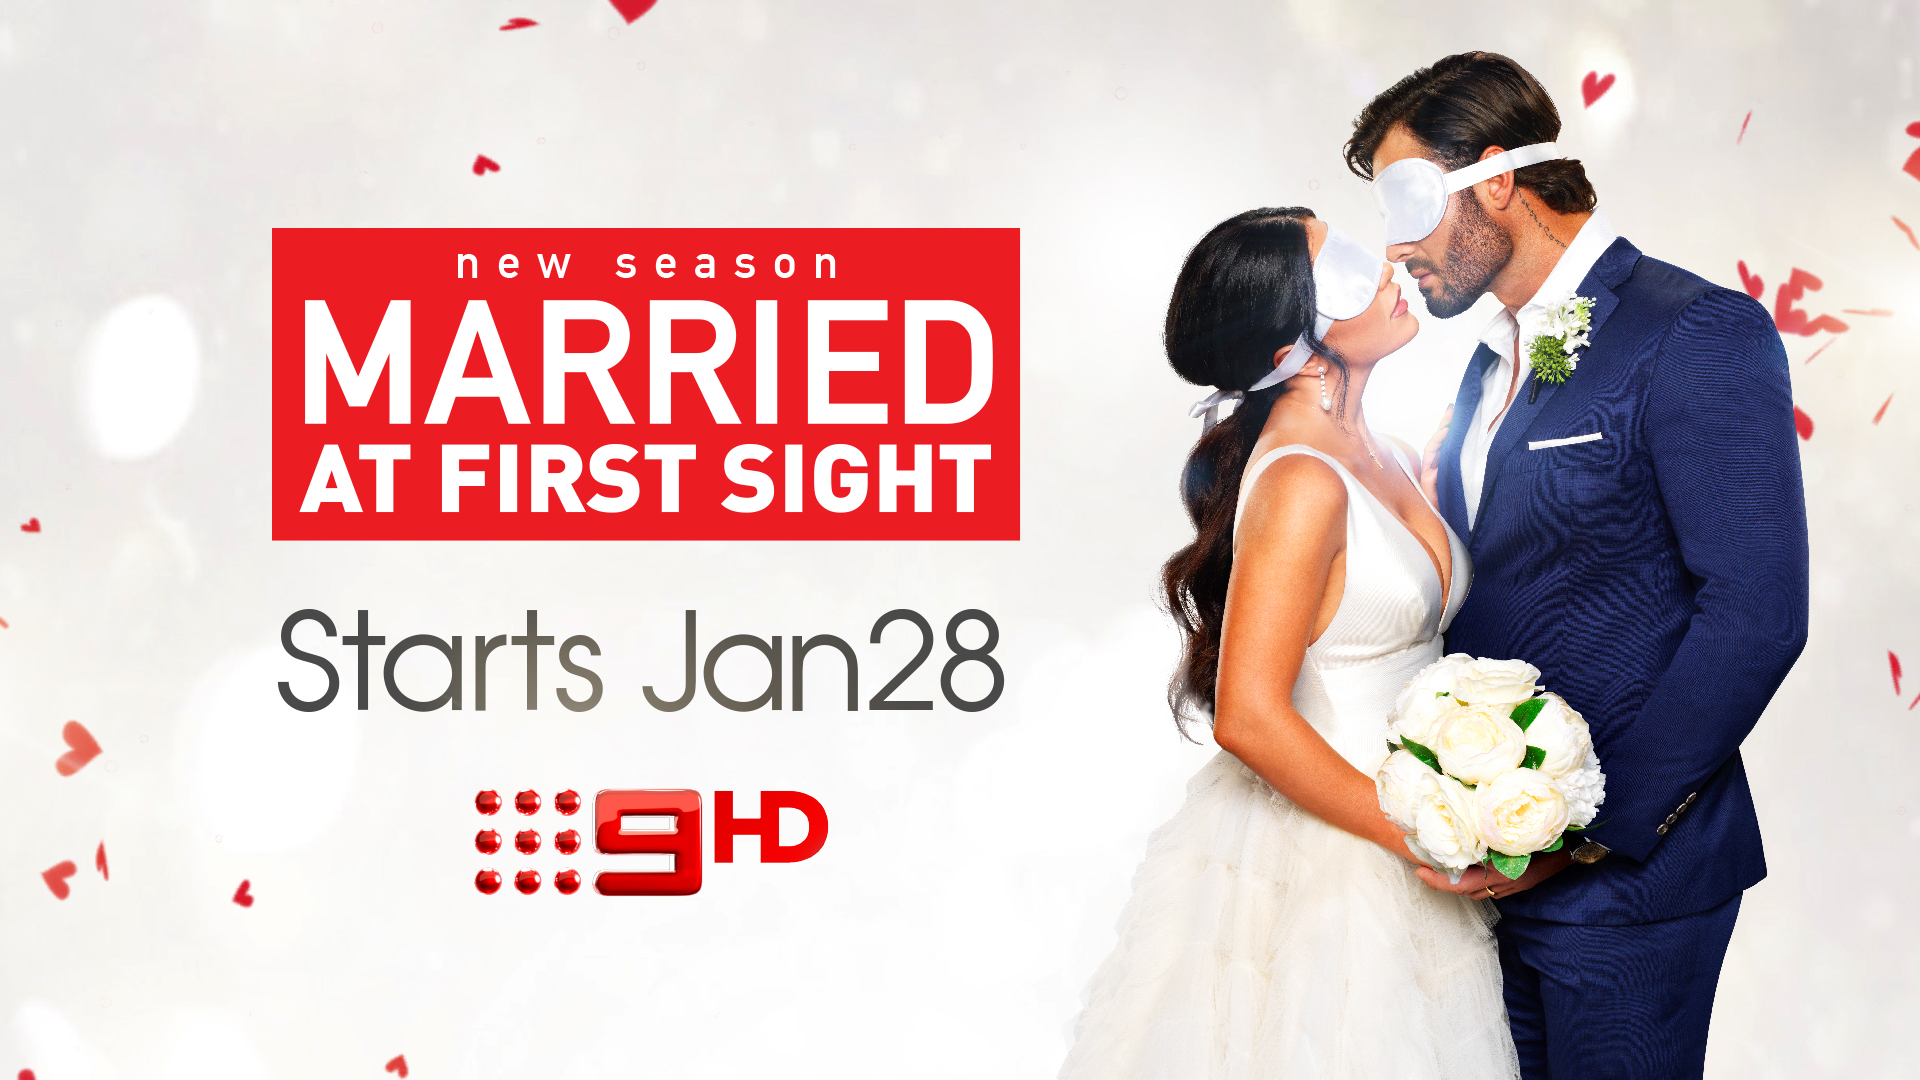 Married at First Sight Returns for its Most Explosive Series Yet Nine